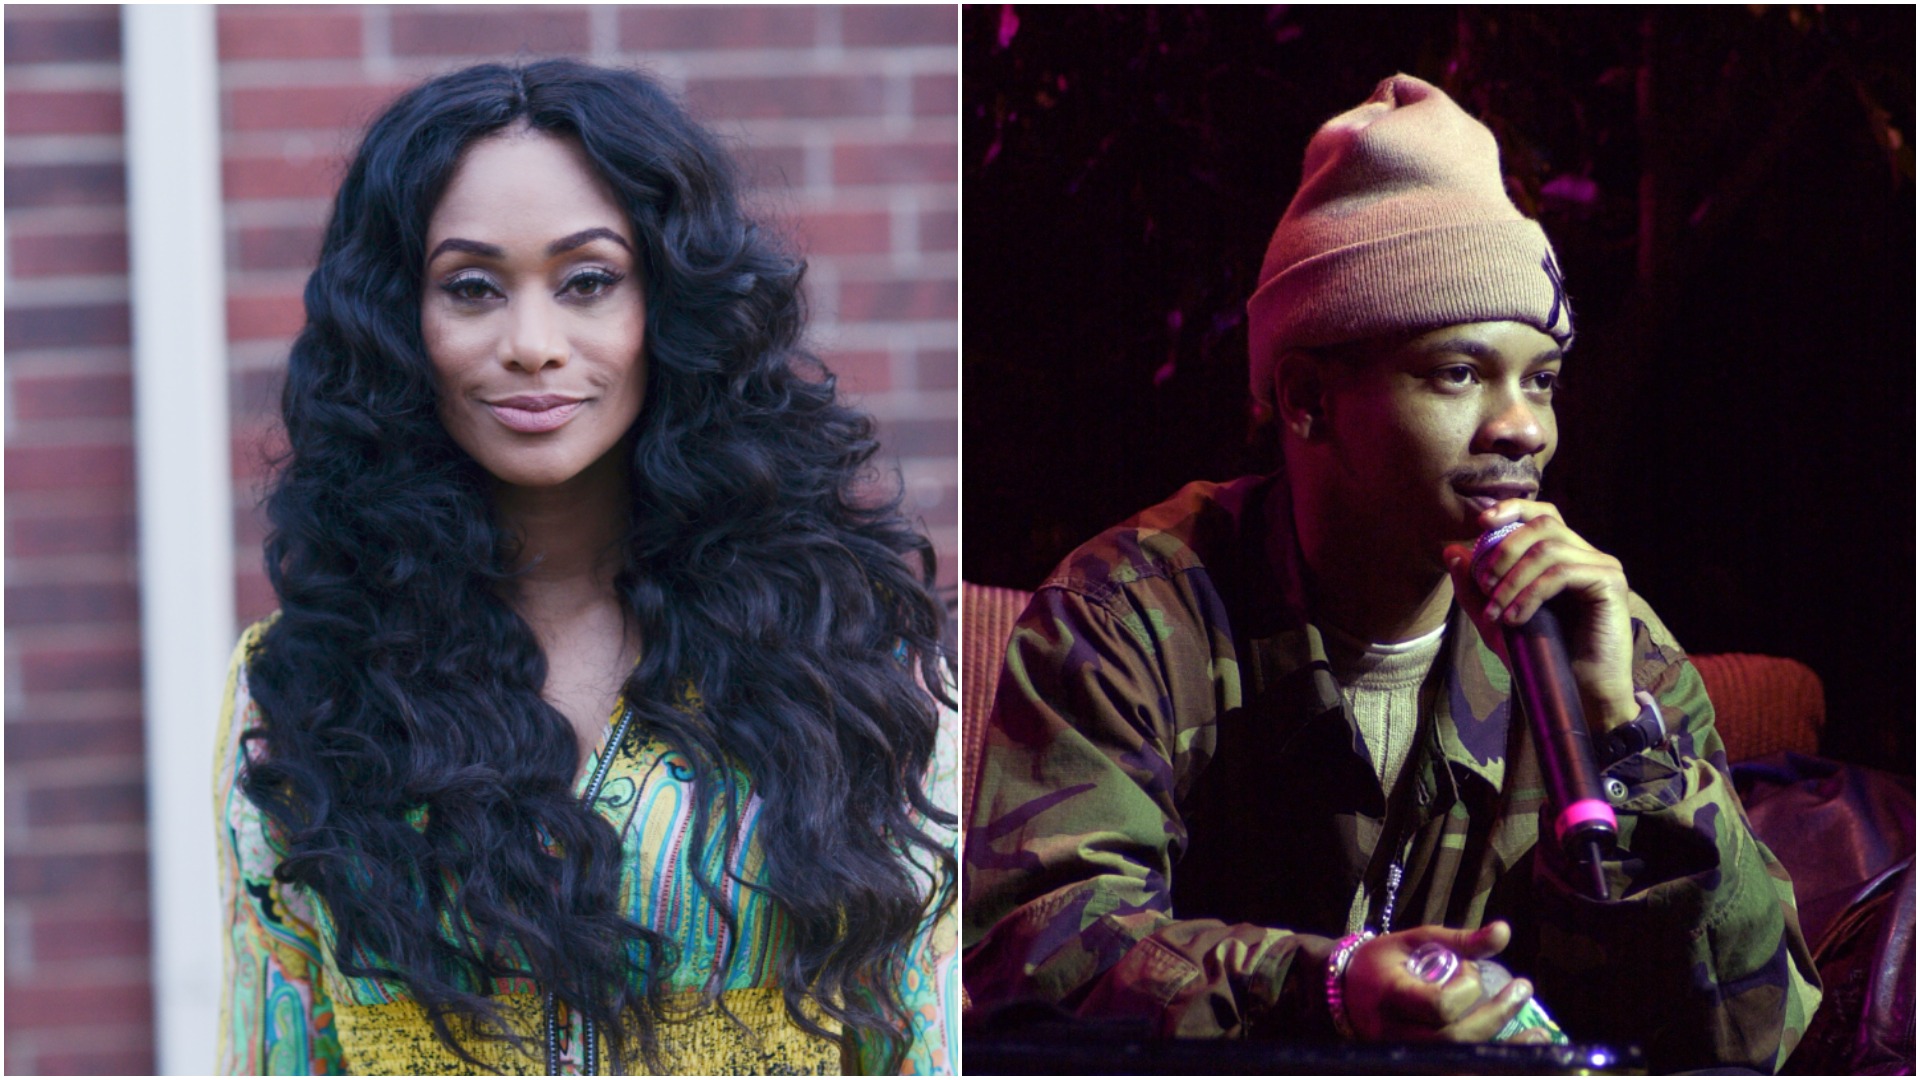 The Real World Homecoming's Tami Roman appeared on Celebrity Wife Swap and David Edwards on tour at Beacon Theatre in New York City